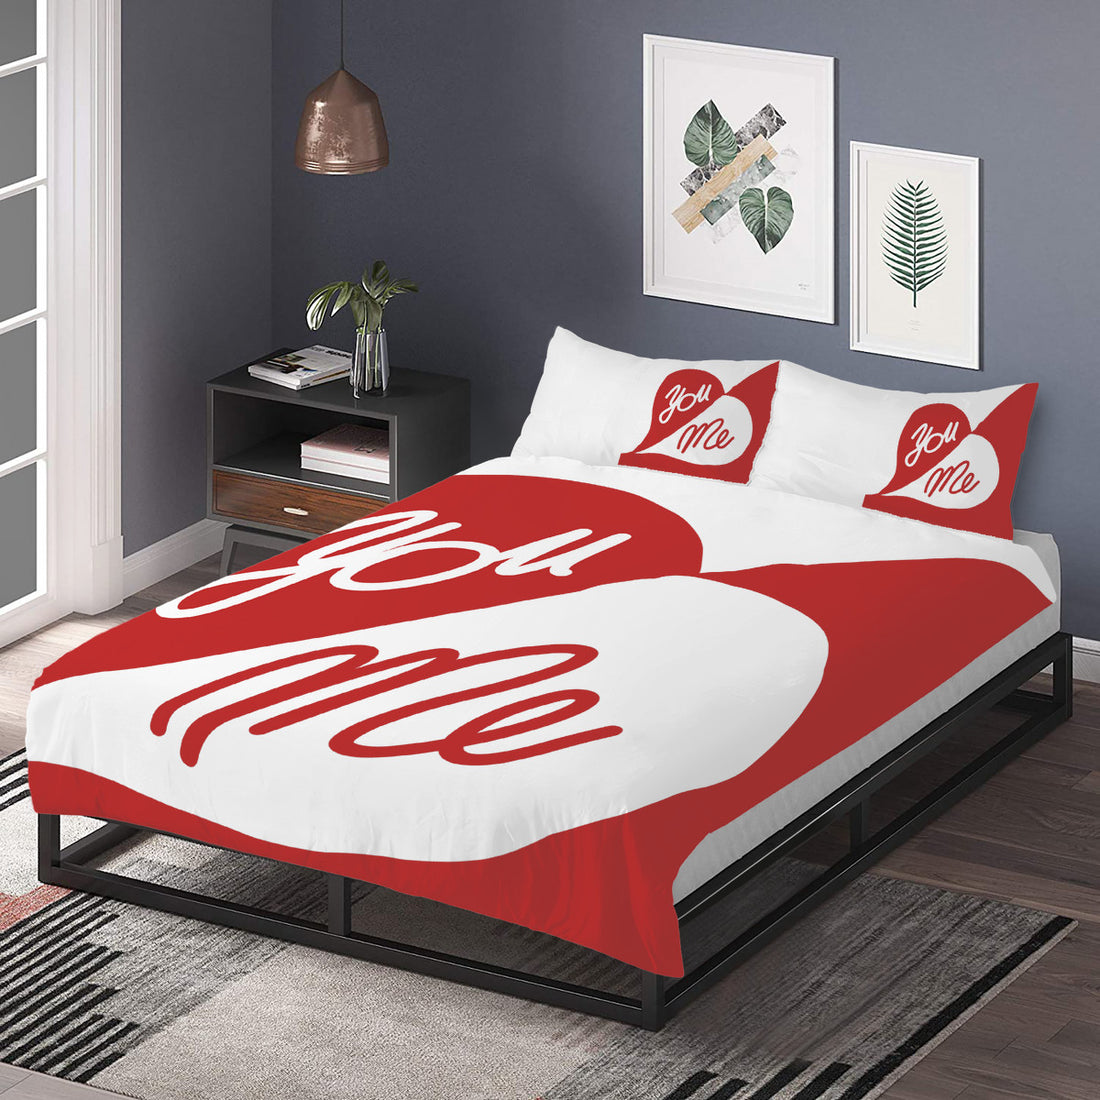 You and Me Bedding red white, Valentine&